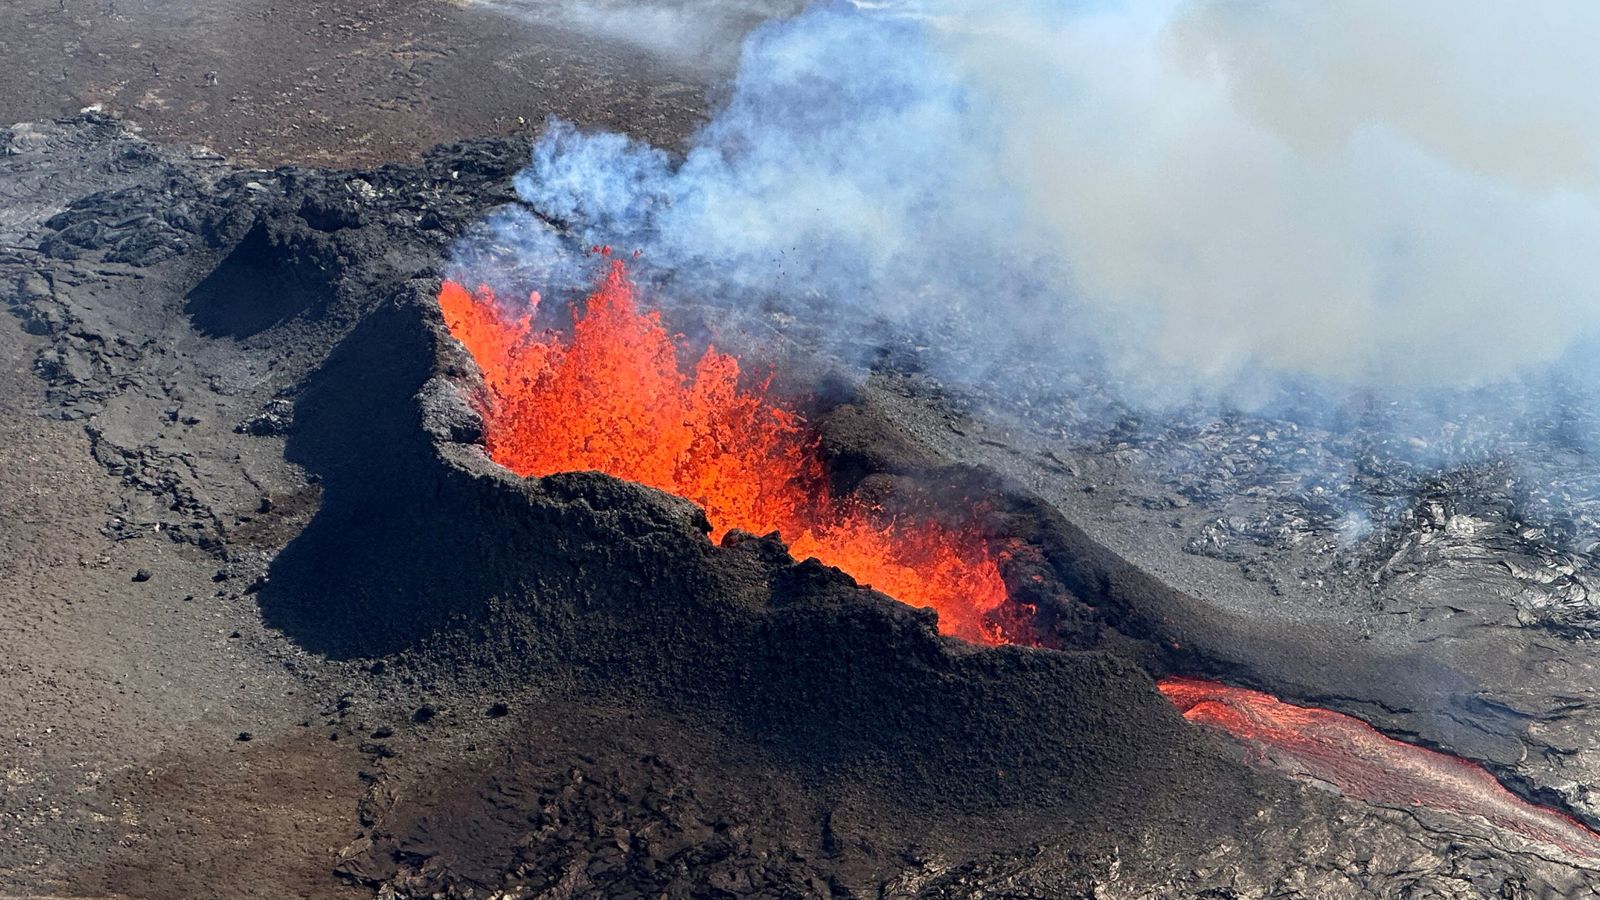 Iceland declares state of emergency over volcanic eruption threat